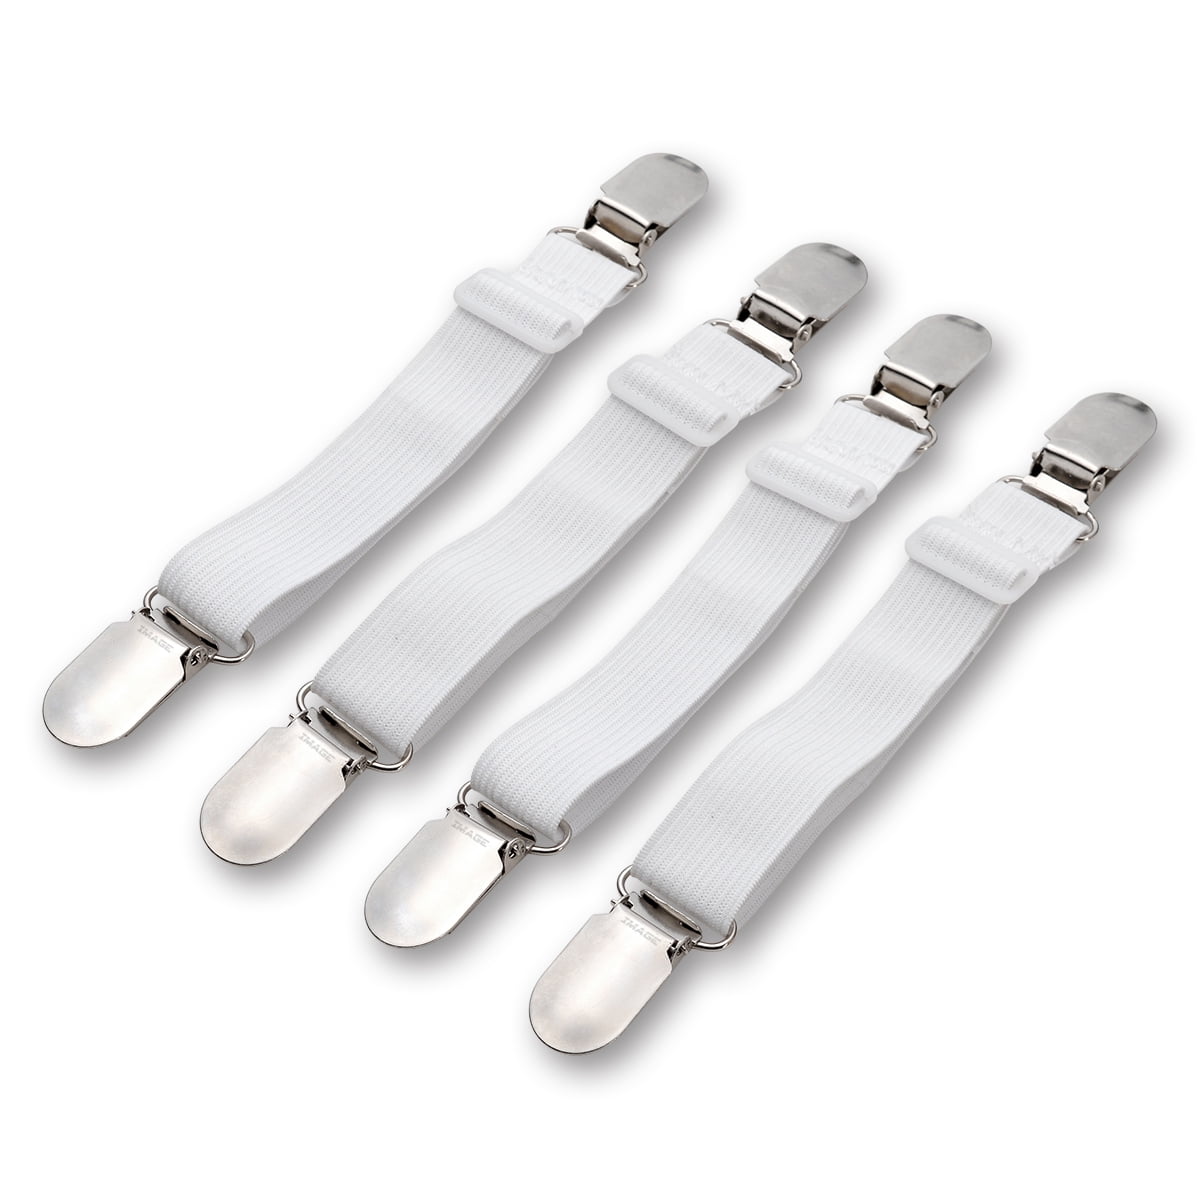 4 Piece Bed Sheet Grippers Set Sheet Holders  Clasp Straps Clips 